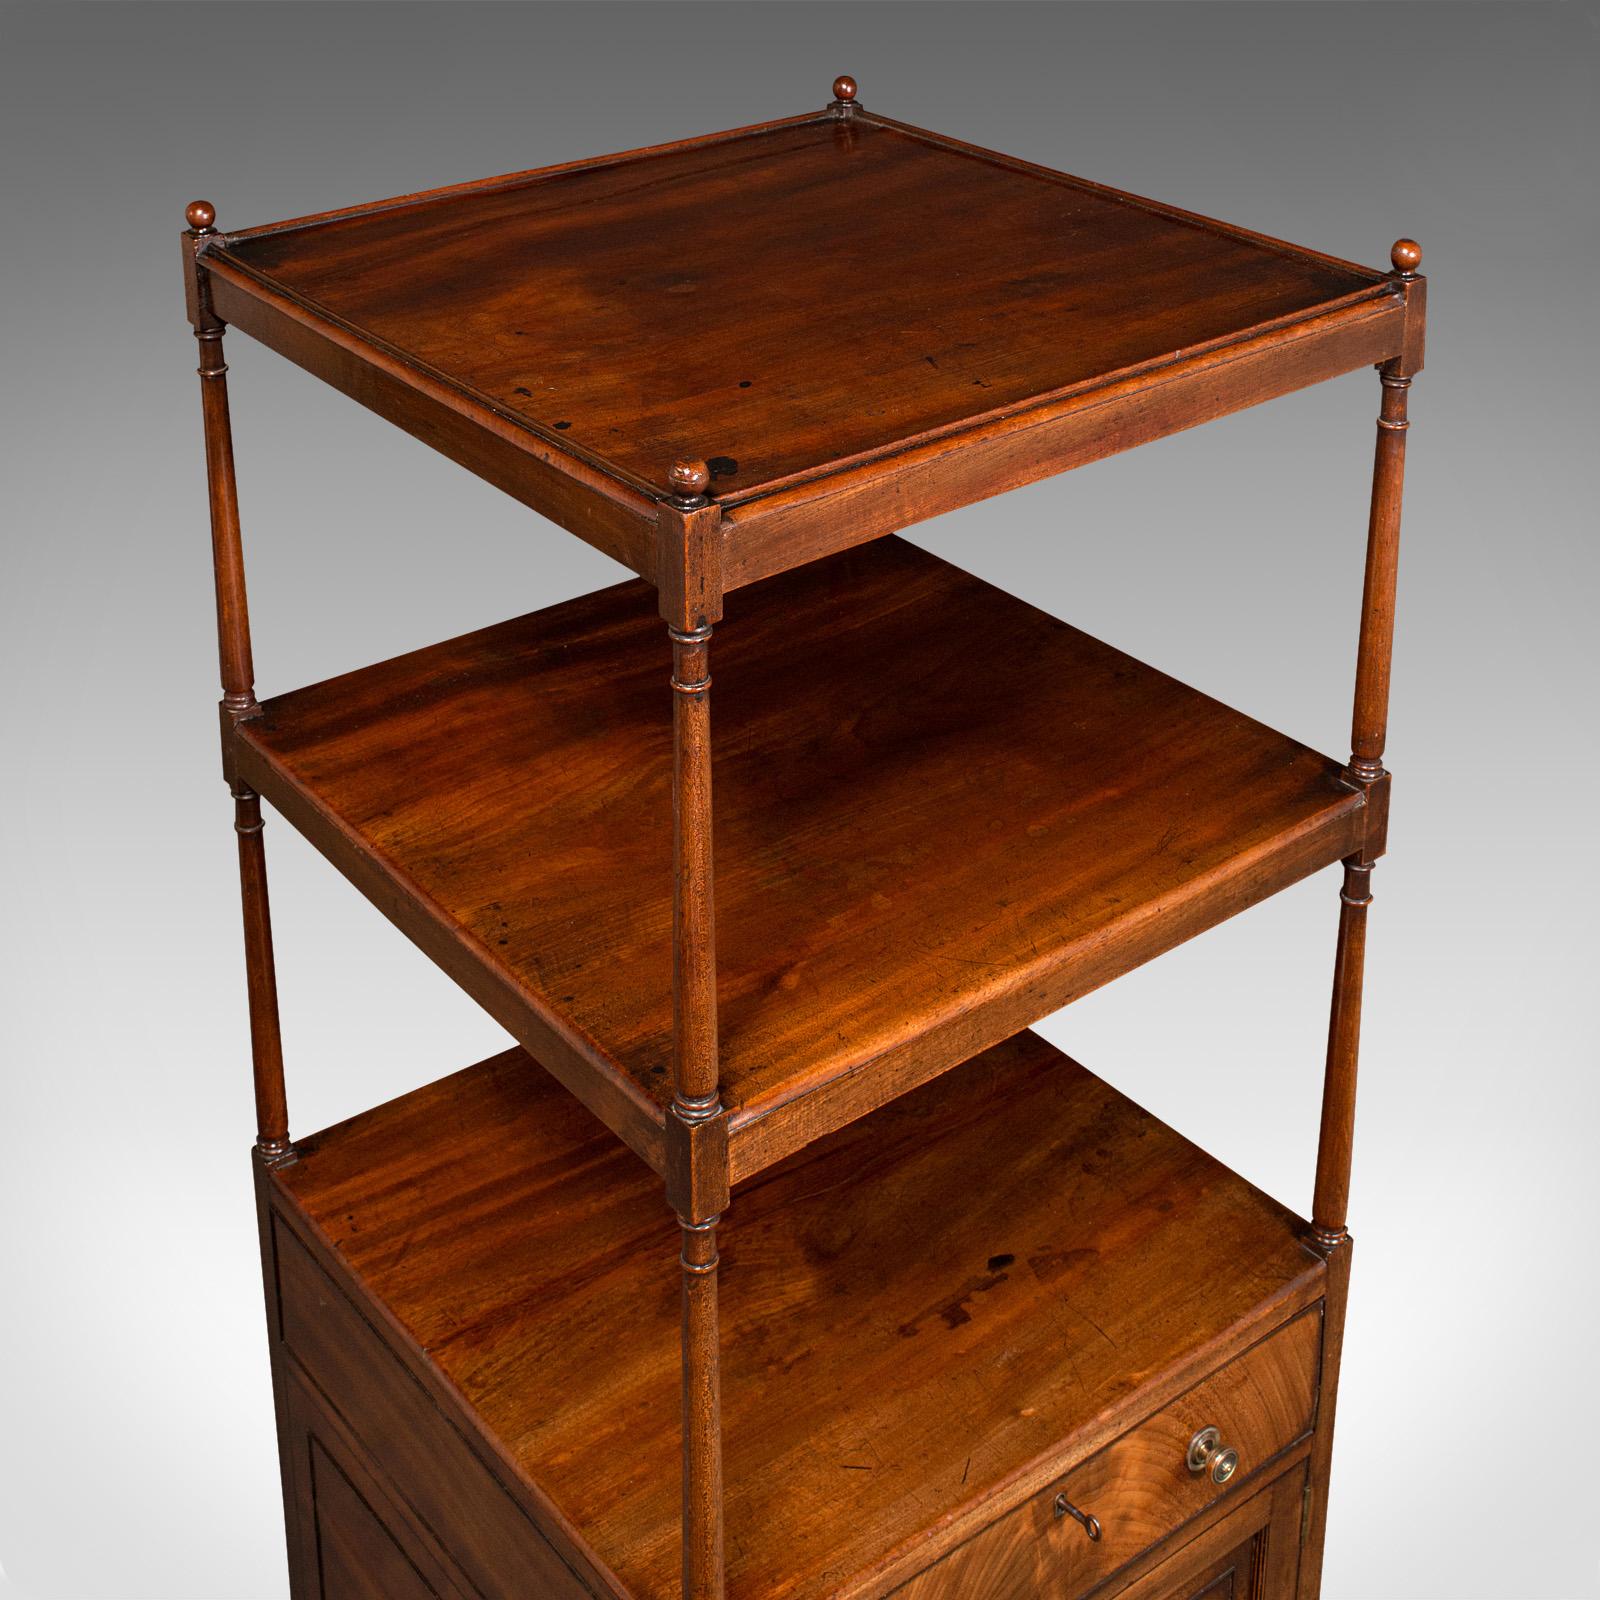 Walnut Antique Two Tier Display Stand, English, Whatnot, Cabinet, Victorian, Circa 1860 For Sale